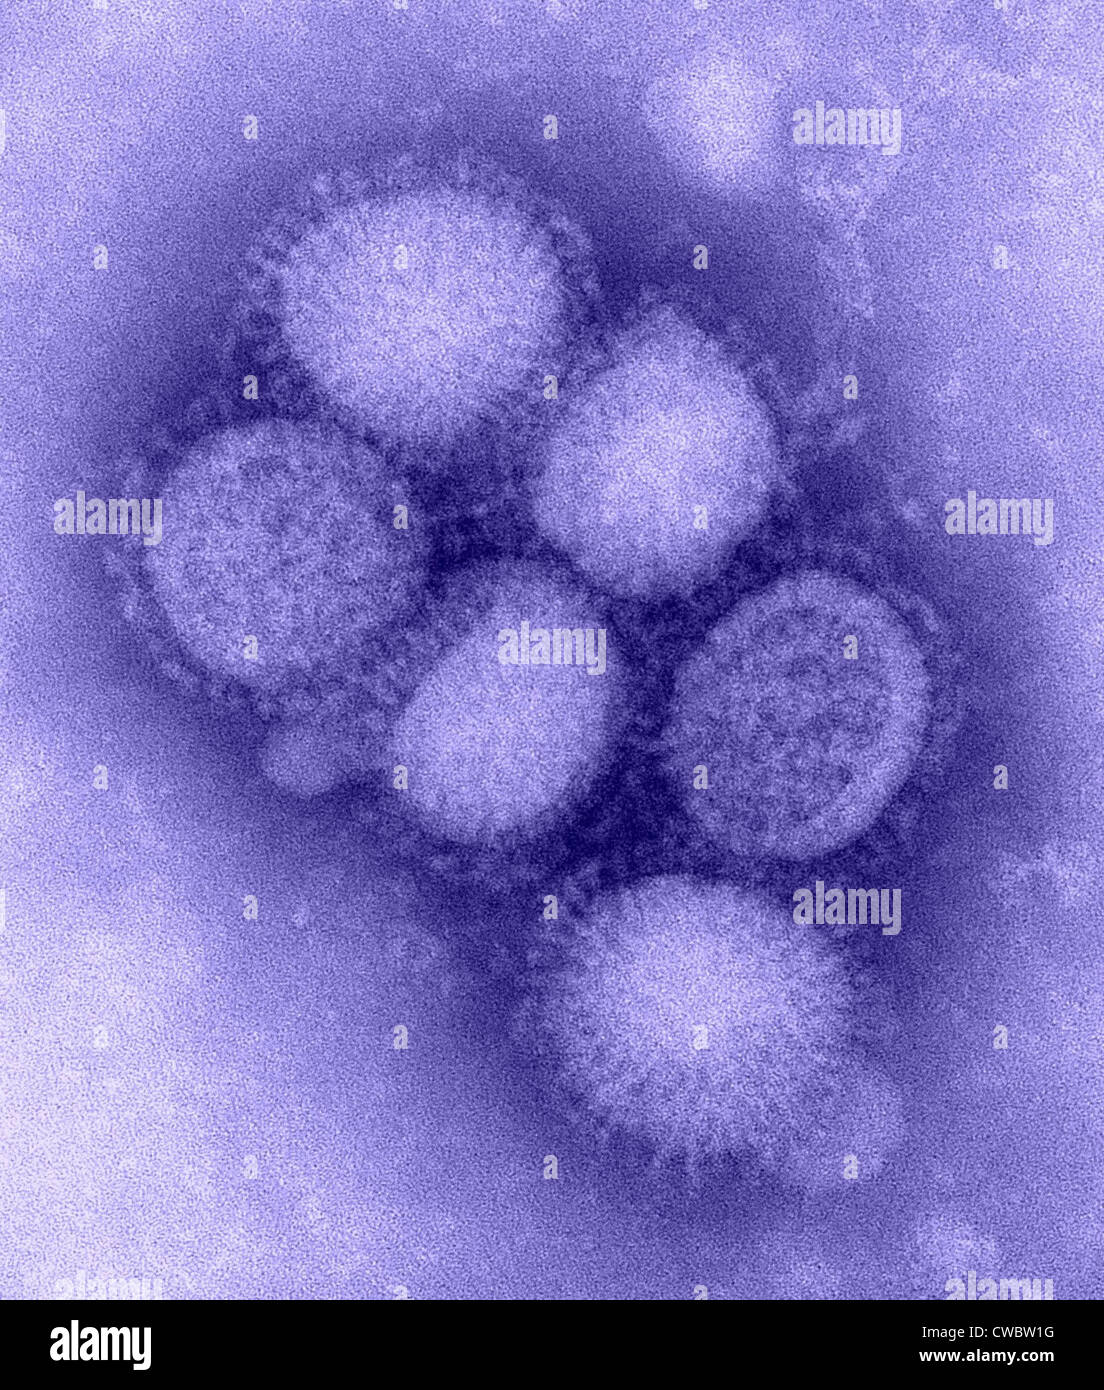 Swine flu virus. Negative stained transmission electron micrograph. Photo by C. S. Goldsmith and A. Balish, 2009. Stock Photo